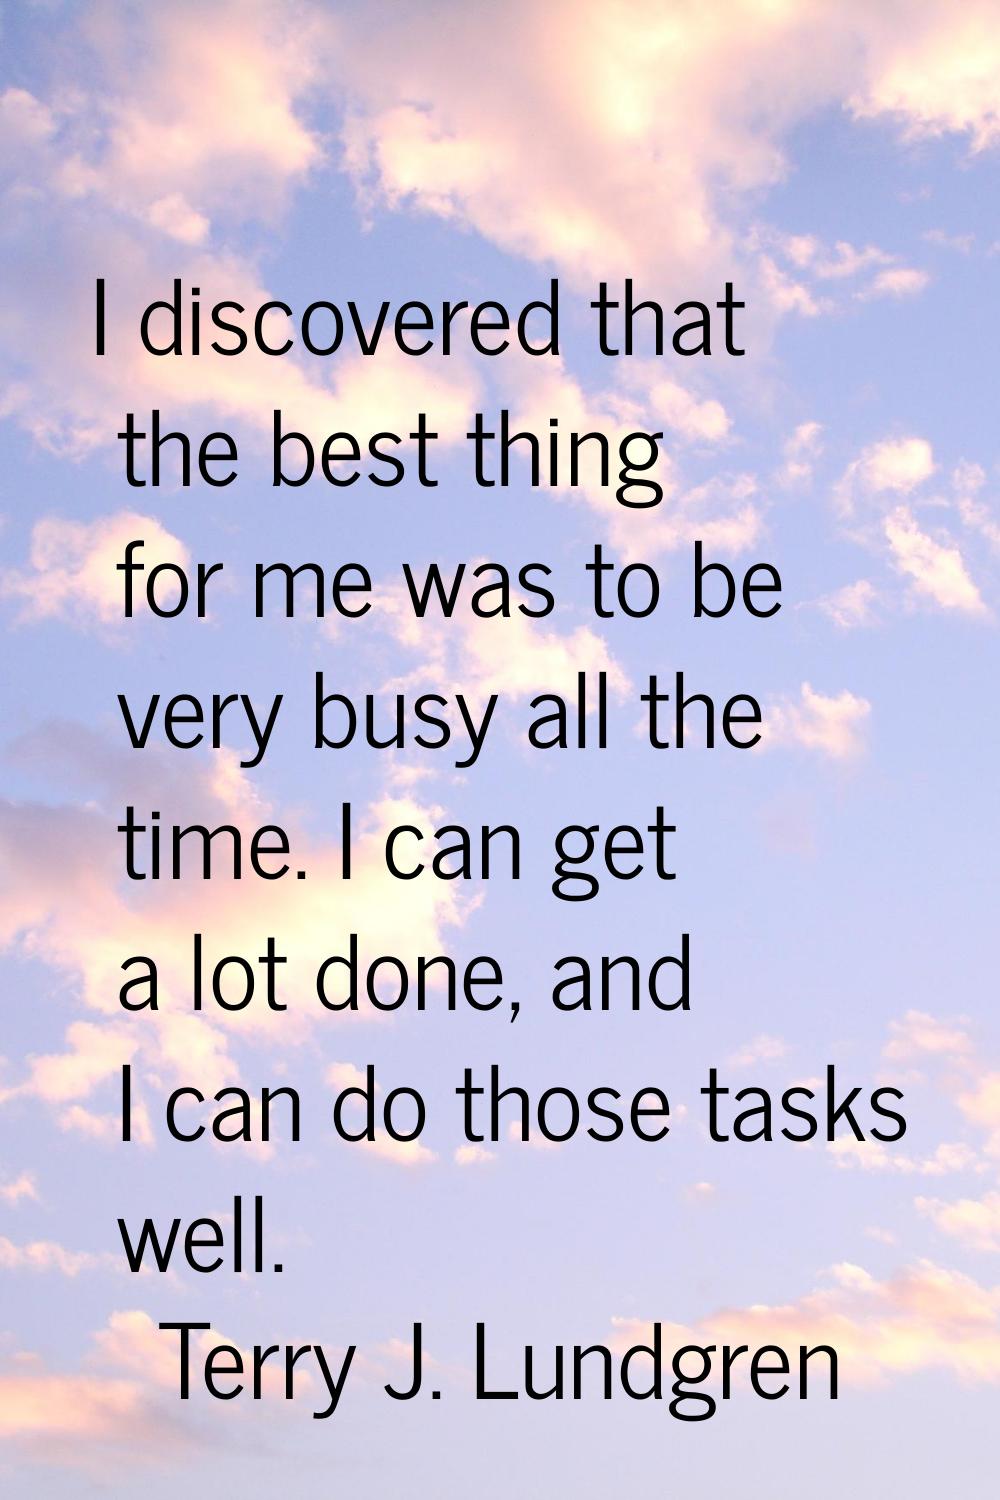 I discovered that the best thing for me was to be very busy all the time. I can get a lot done, and